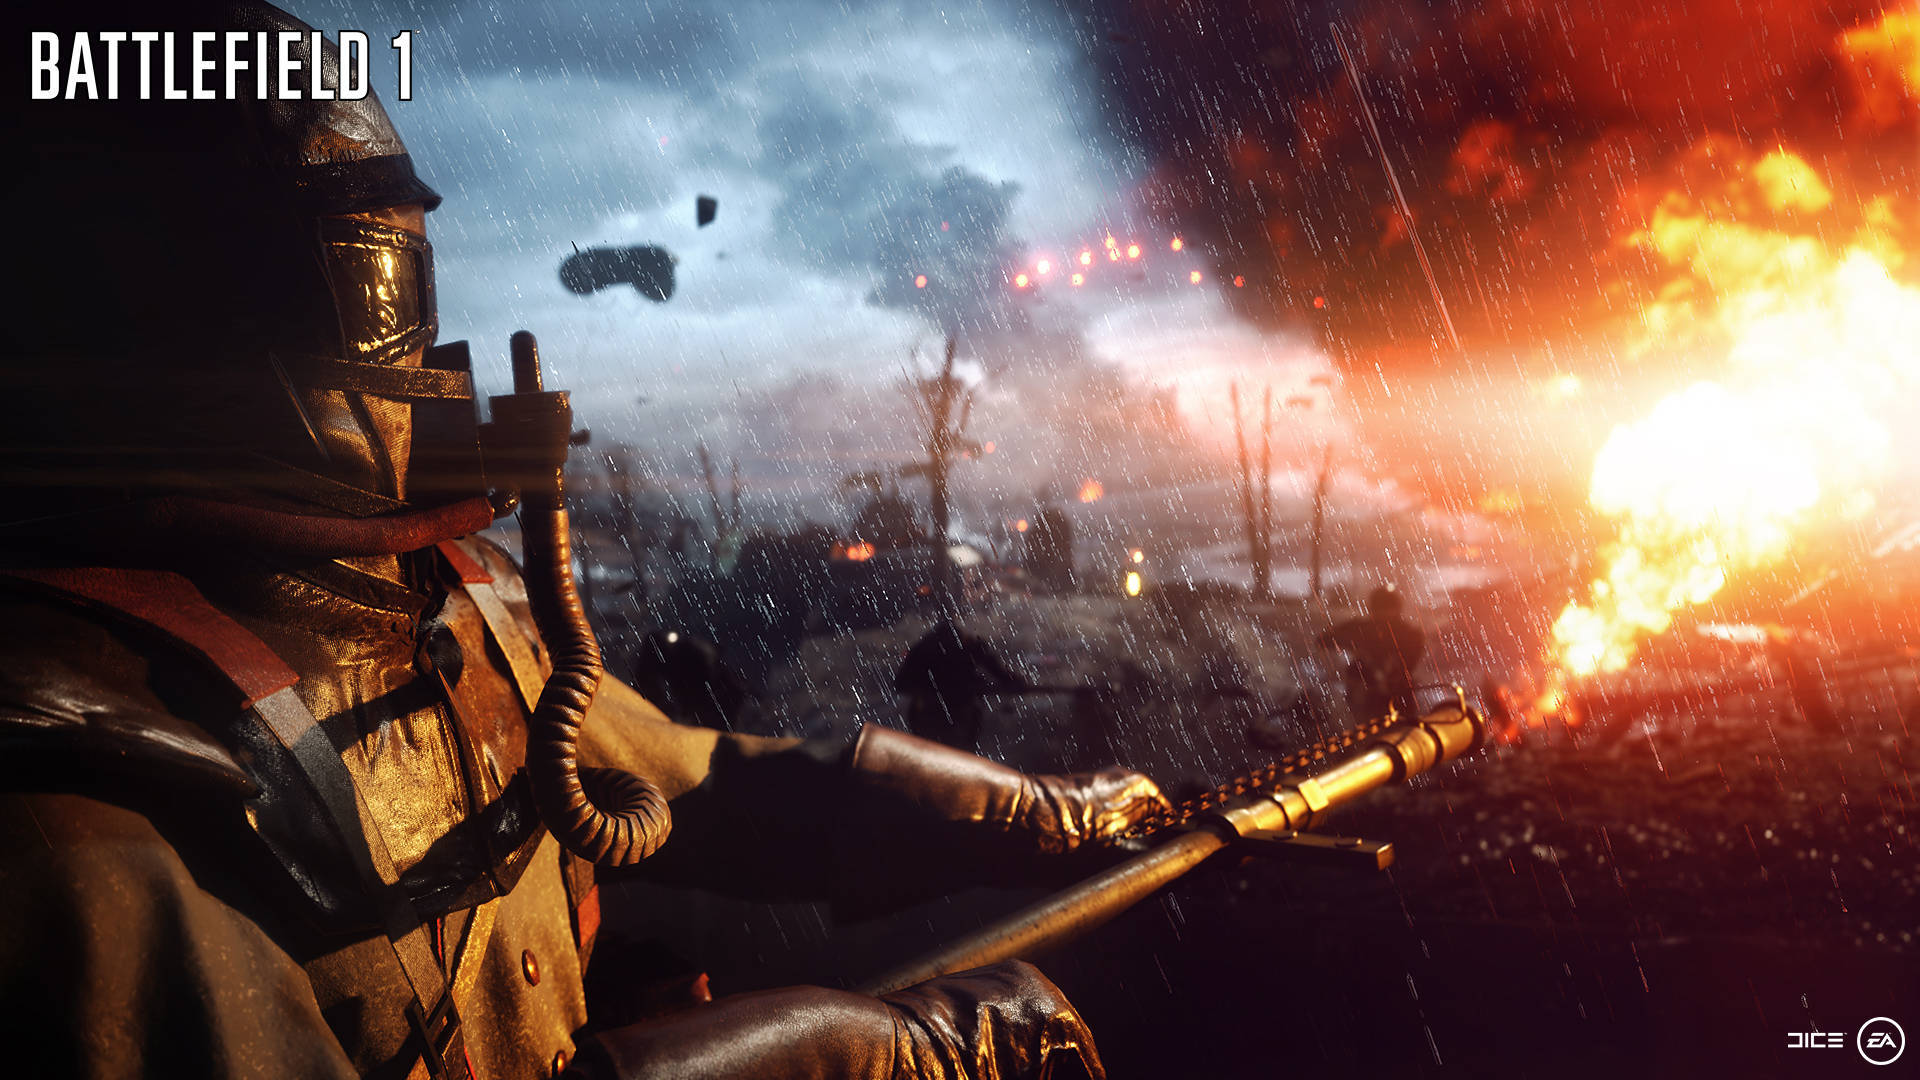 Explosive Action: The Flame Trooper From Battlefield 1 In Hd